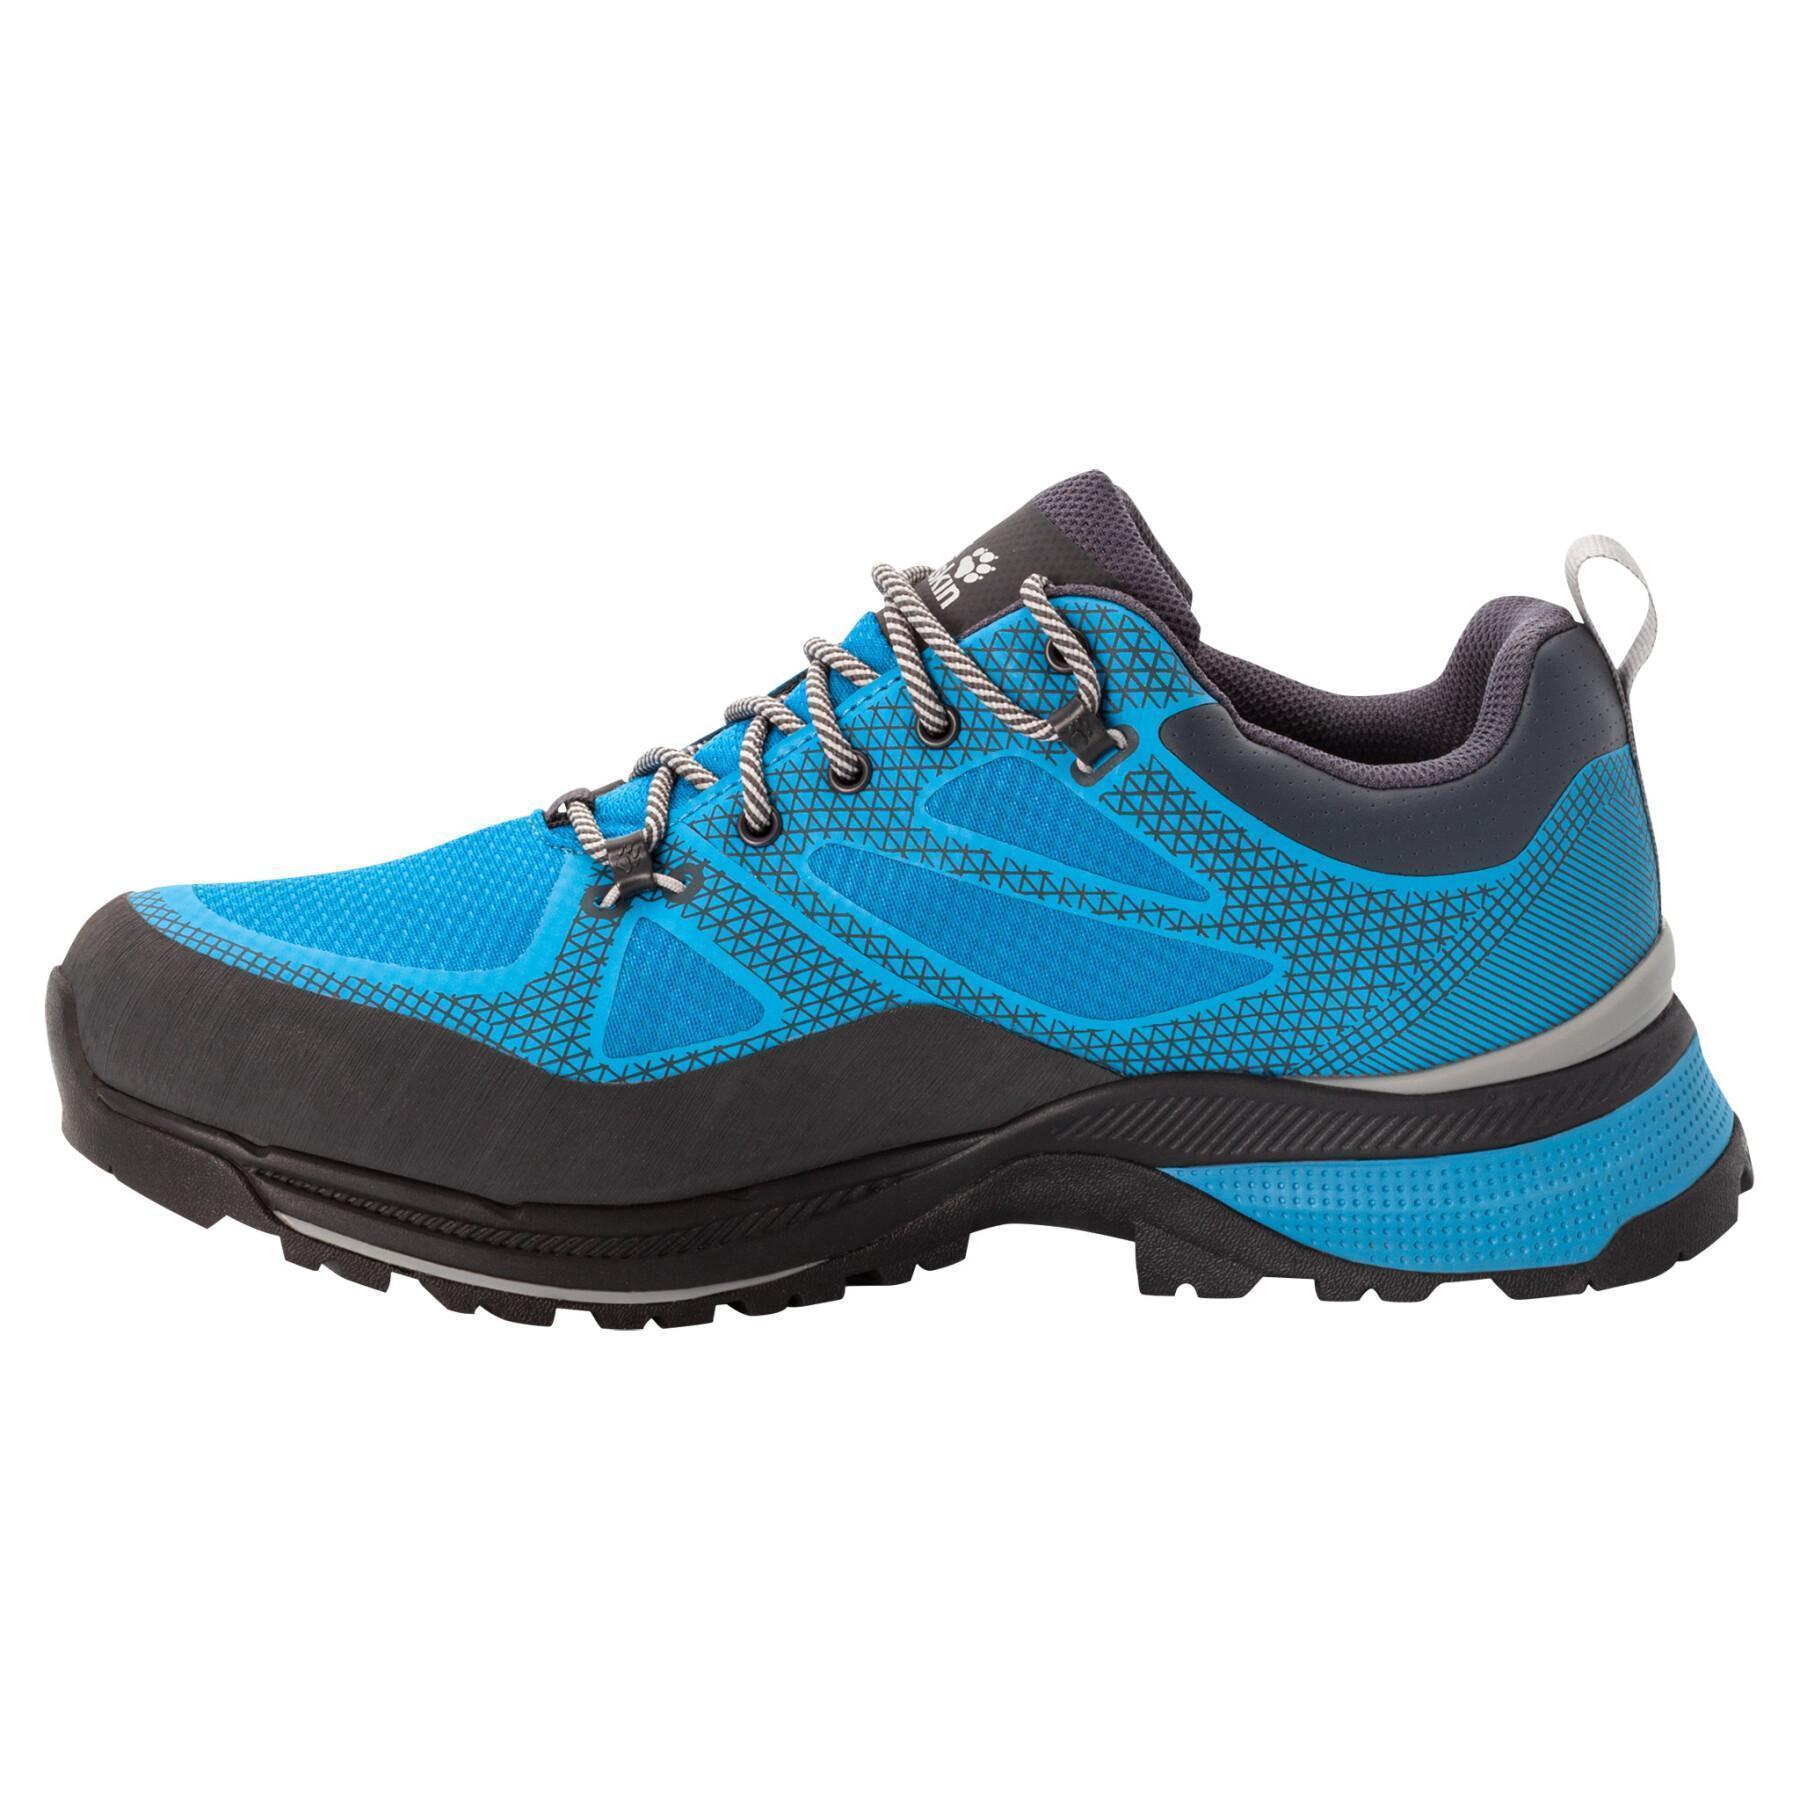 Hiking shoes Jack Wolfskin Force Striker Texapore Low